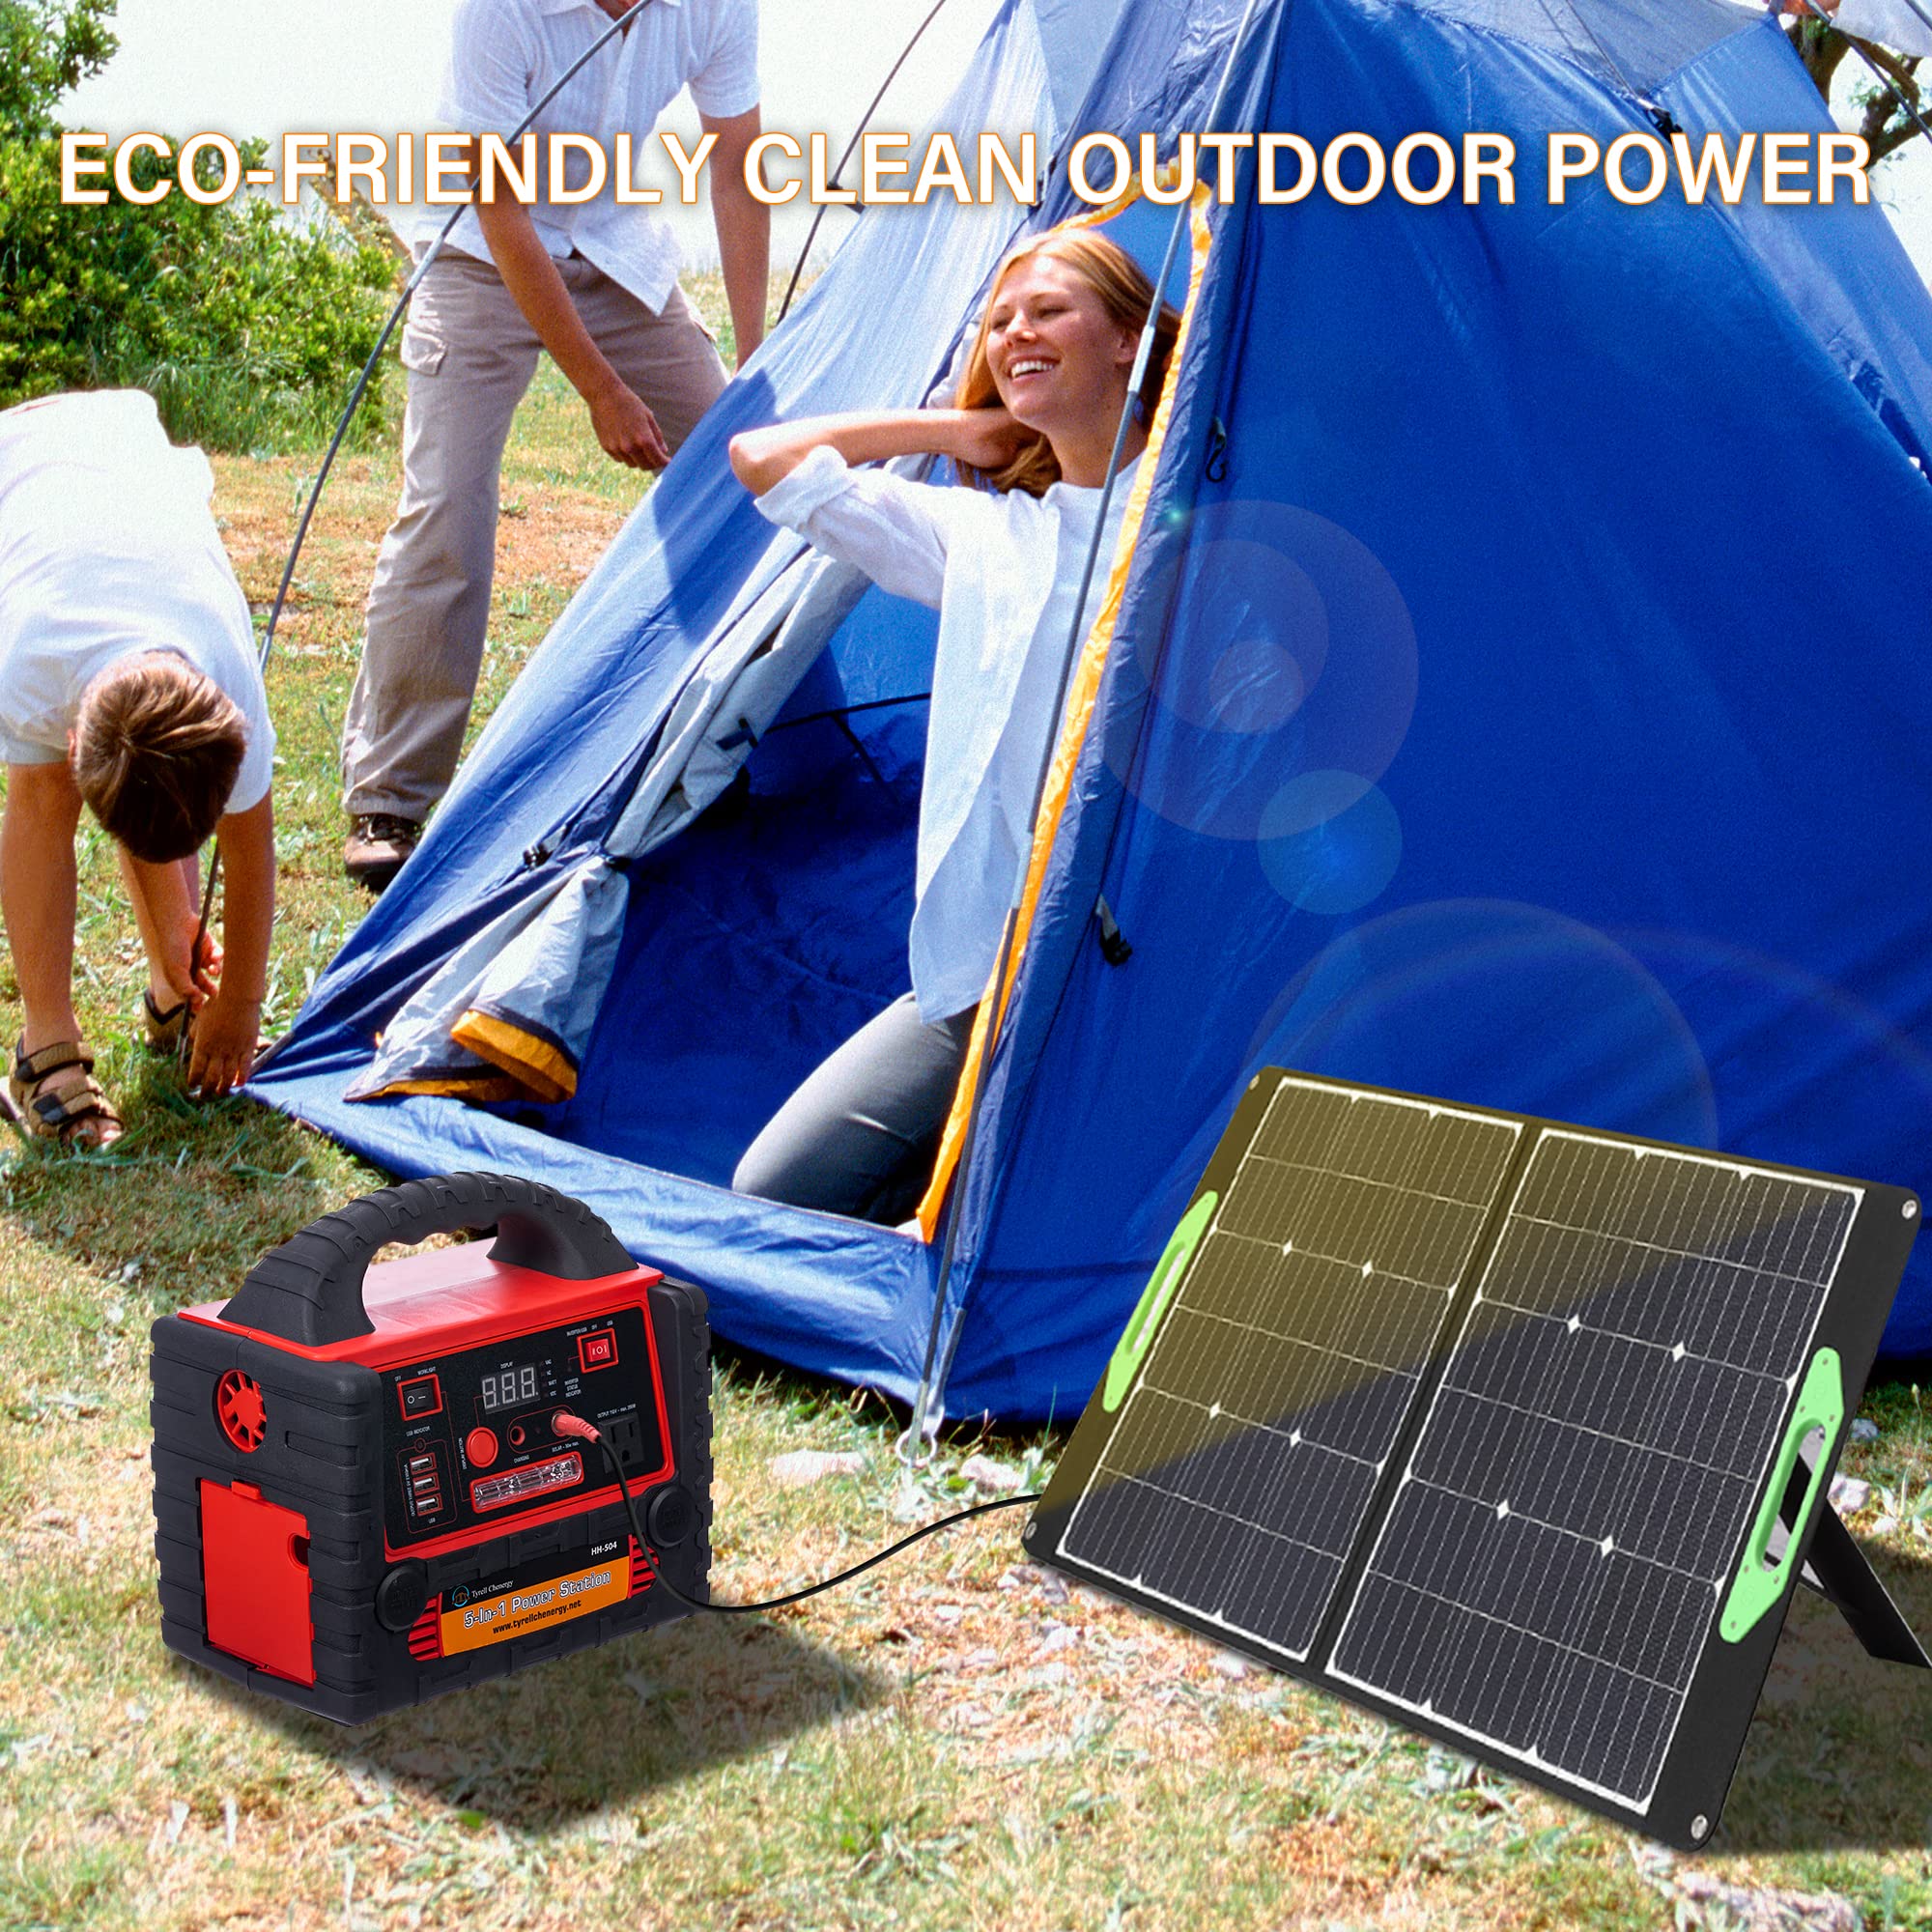 Tyrell Chenergy 200W Portable Power Station Solar Generator,400W Inverter Peak Surge,Built-in LED light,3 USB Ports/2 DC Ports/1 AC Outlet for Outdoors Camping Travel Hunting Emergency Use